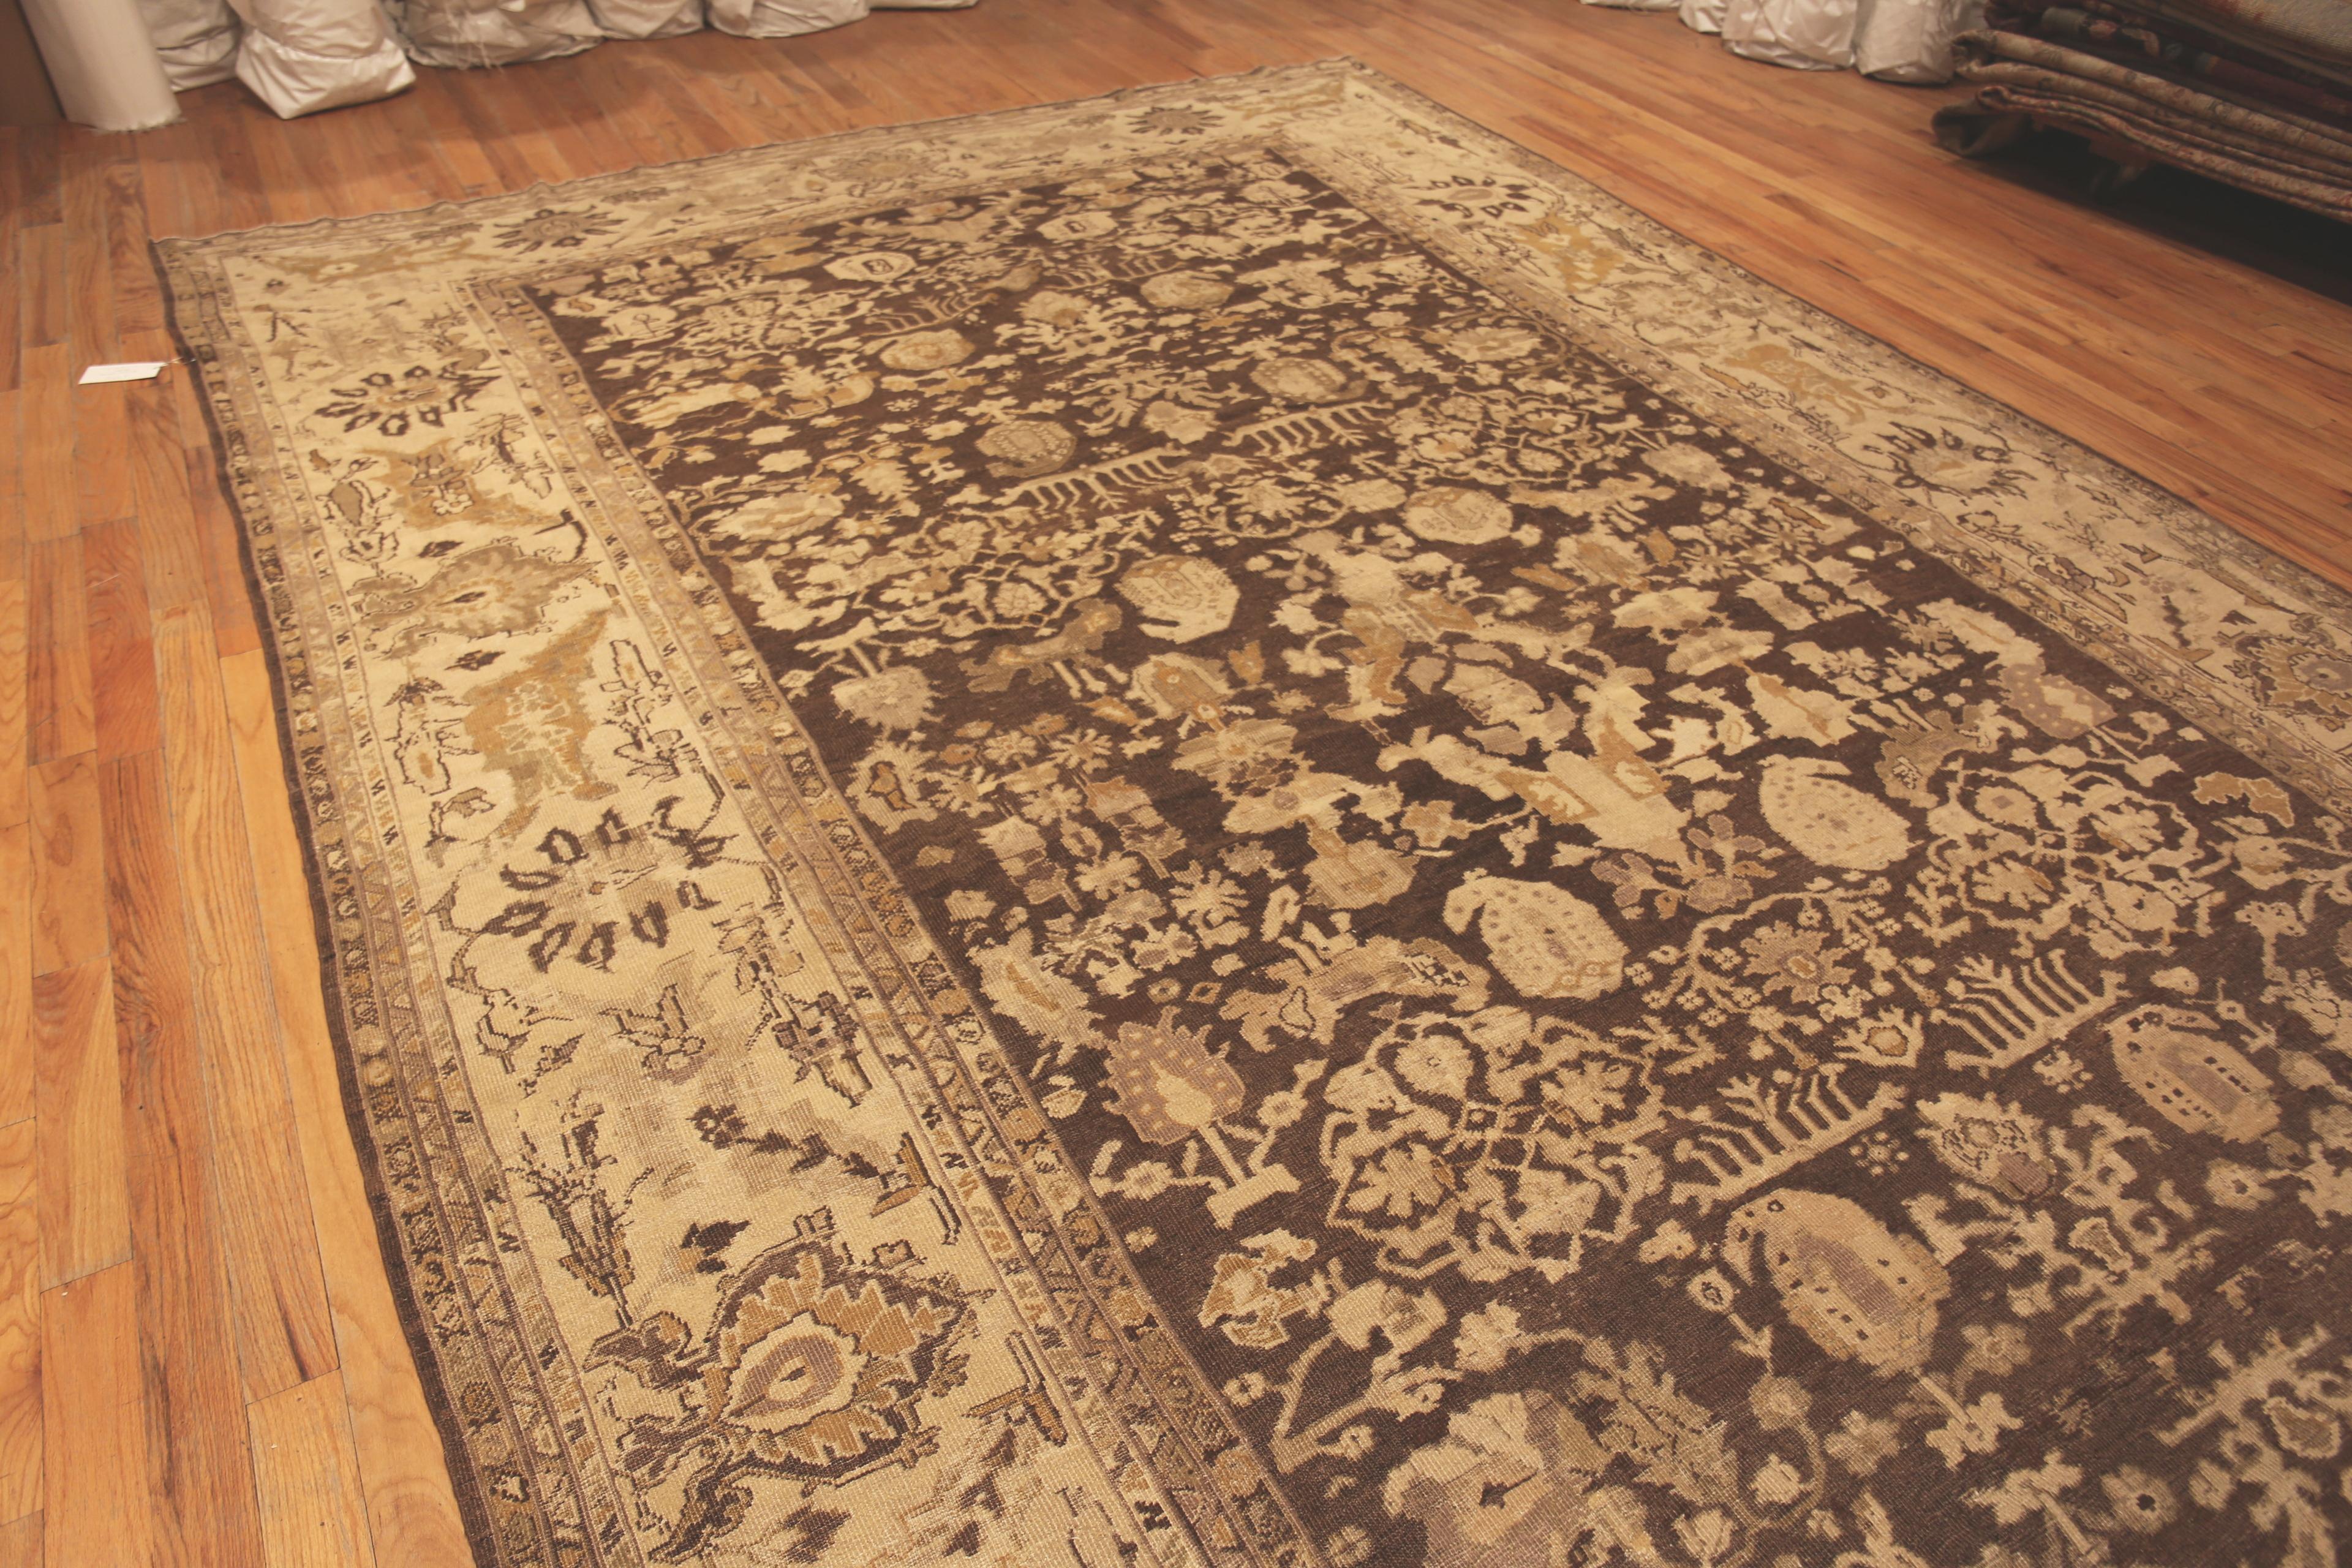 Large Casual Paisley Design Neutral Earthy Antique Rustic Persian Sultanabad Rug, Country of Origin: Persia, Circa Date: 1900. Size: 10 ft 1 in x 16 ft 5 in (3.07 m x 5 m)

